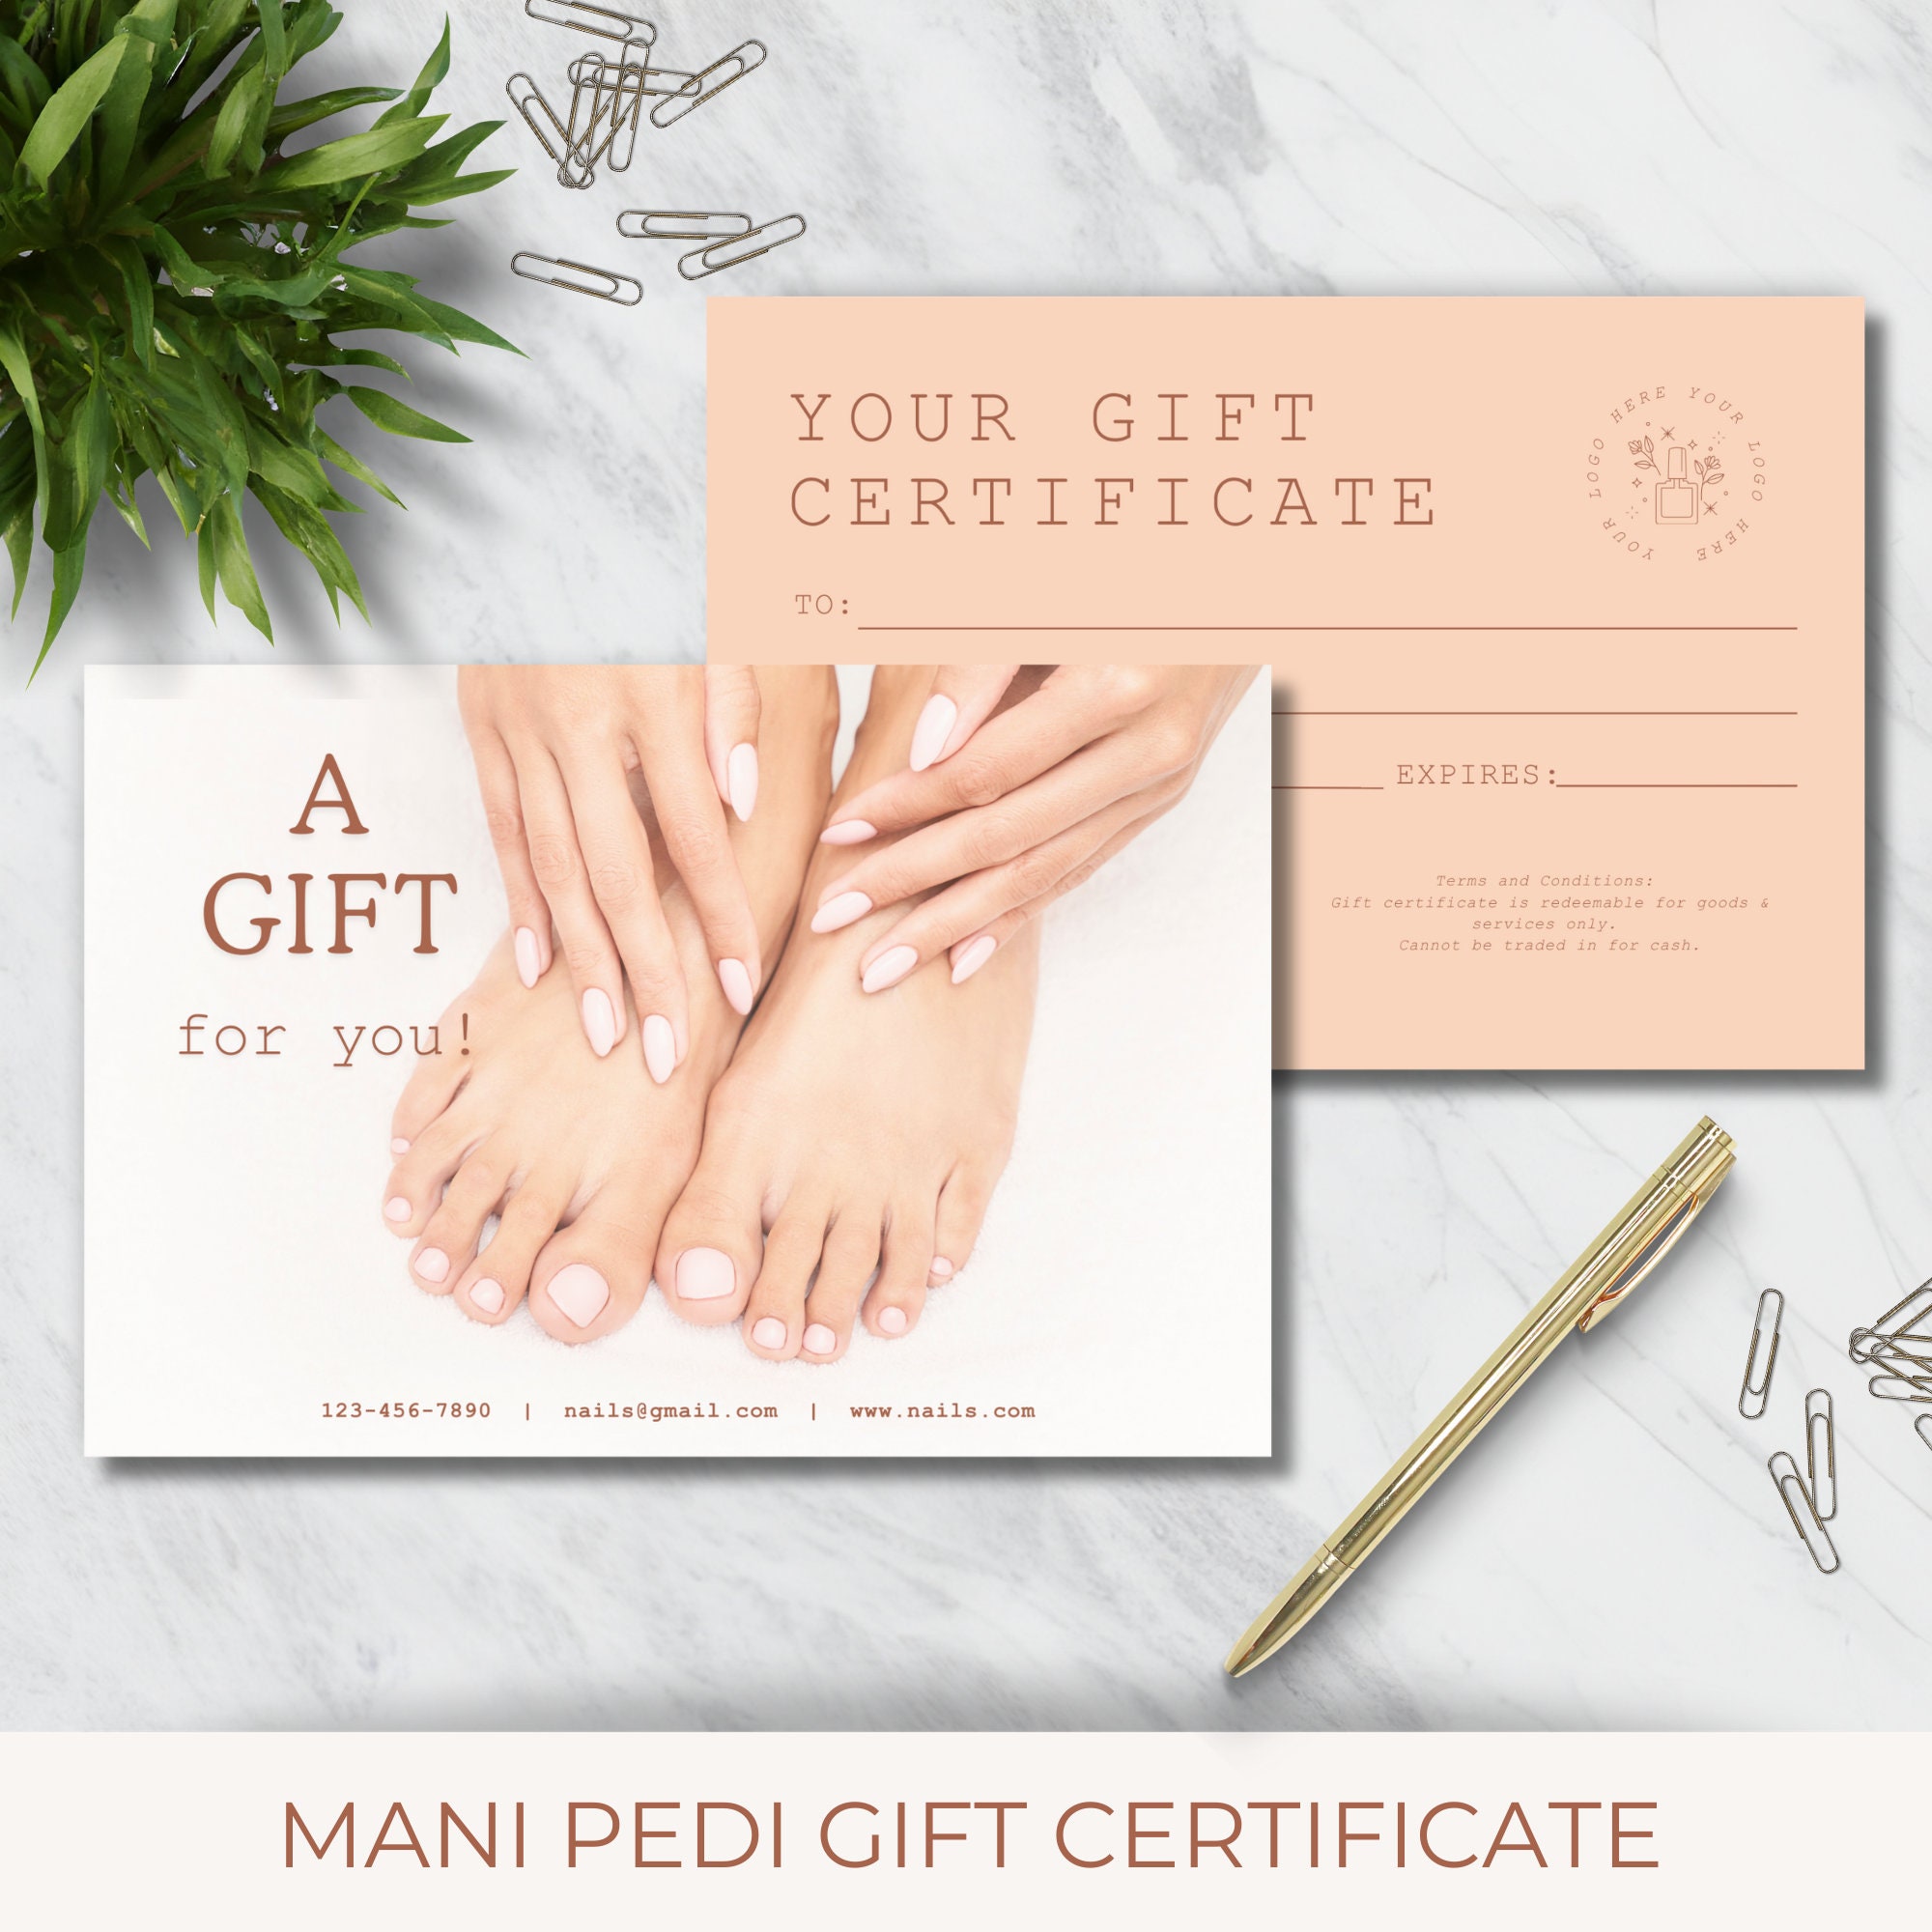 Nail Salon Gift Certificate and Business Card Template